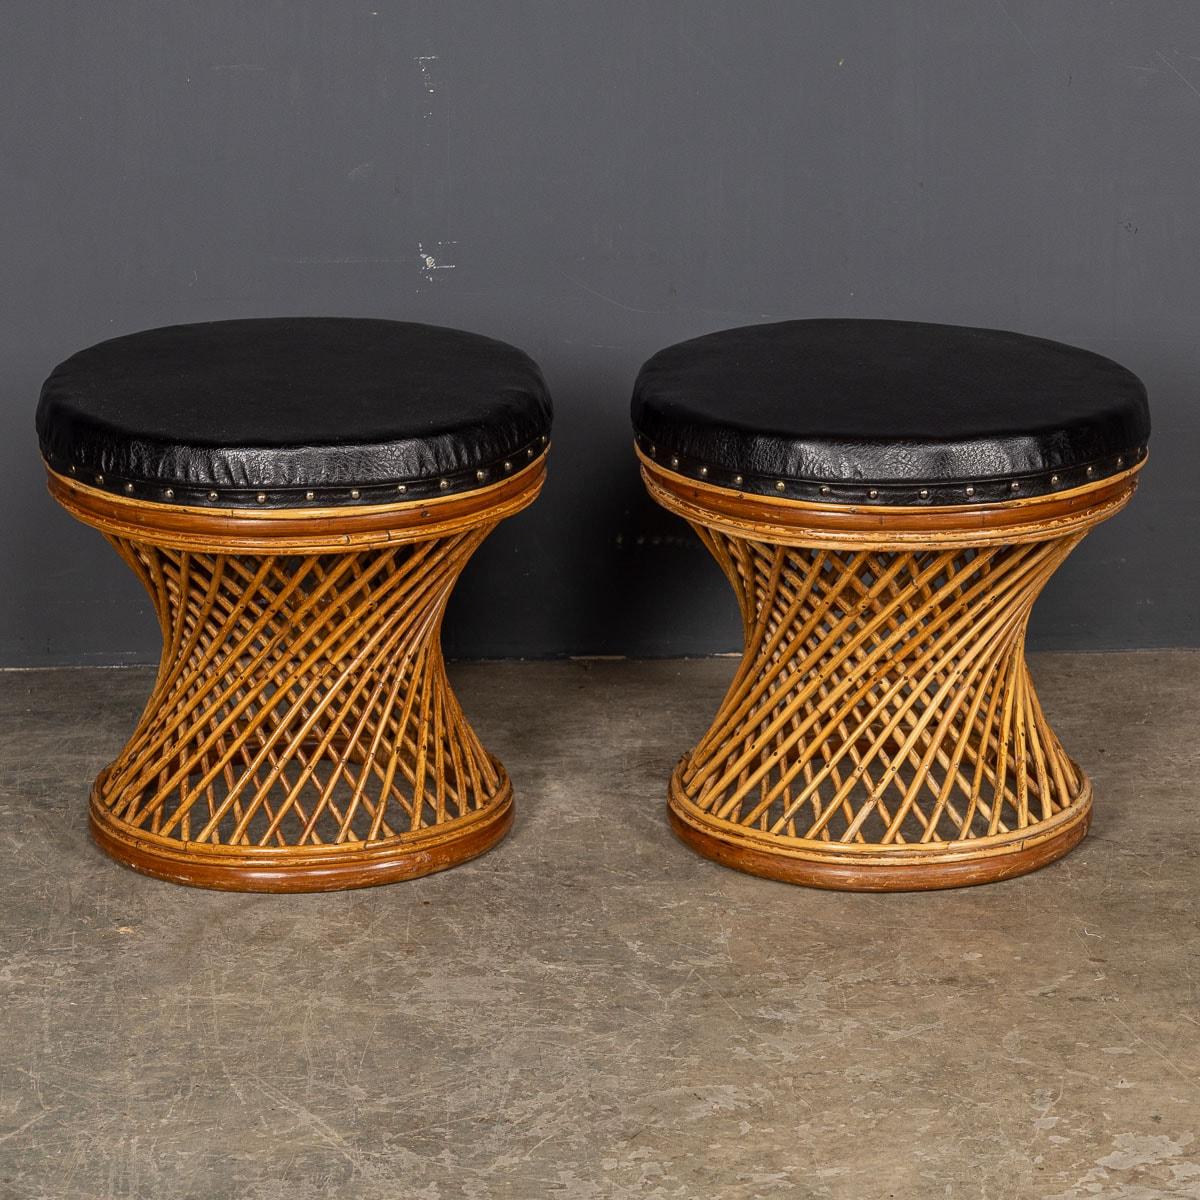 Two charming stools from the mid-20th Century, skilfully crafted from bamboo and adorned with leatherette, boast a captivating design featuring an inter-weaving hourglass-shaped body and a seat cover lined with supple leatherette. These compact low